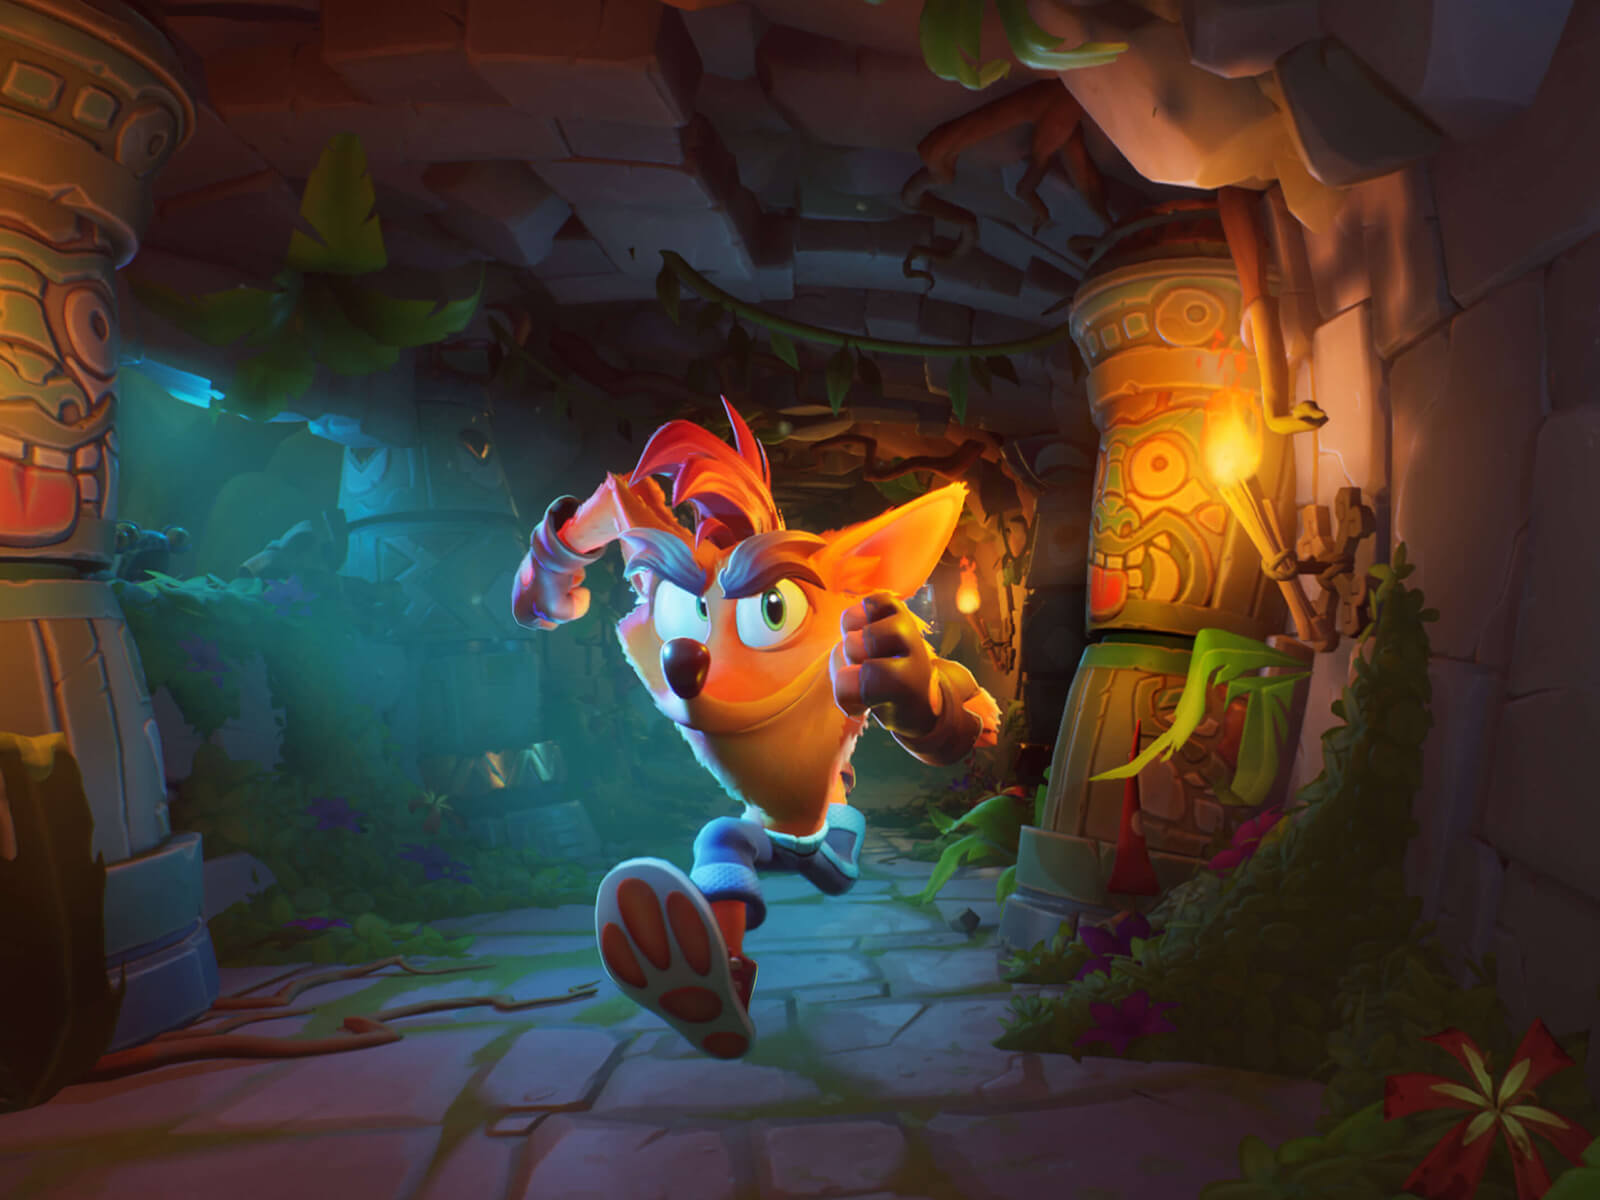 A screenshot from Crash Bandicoot 4: It’s About Time depicting Crash running down a temple hallway.